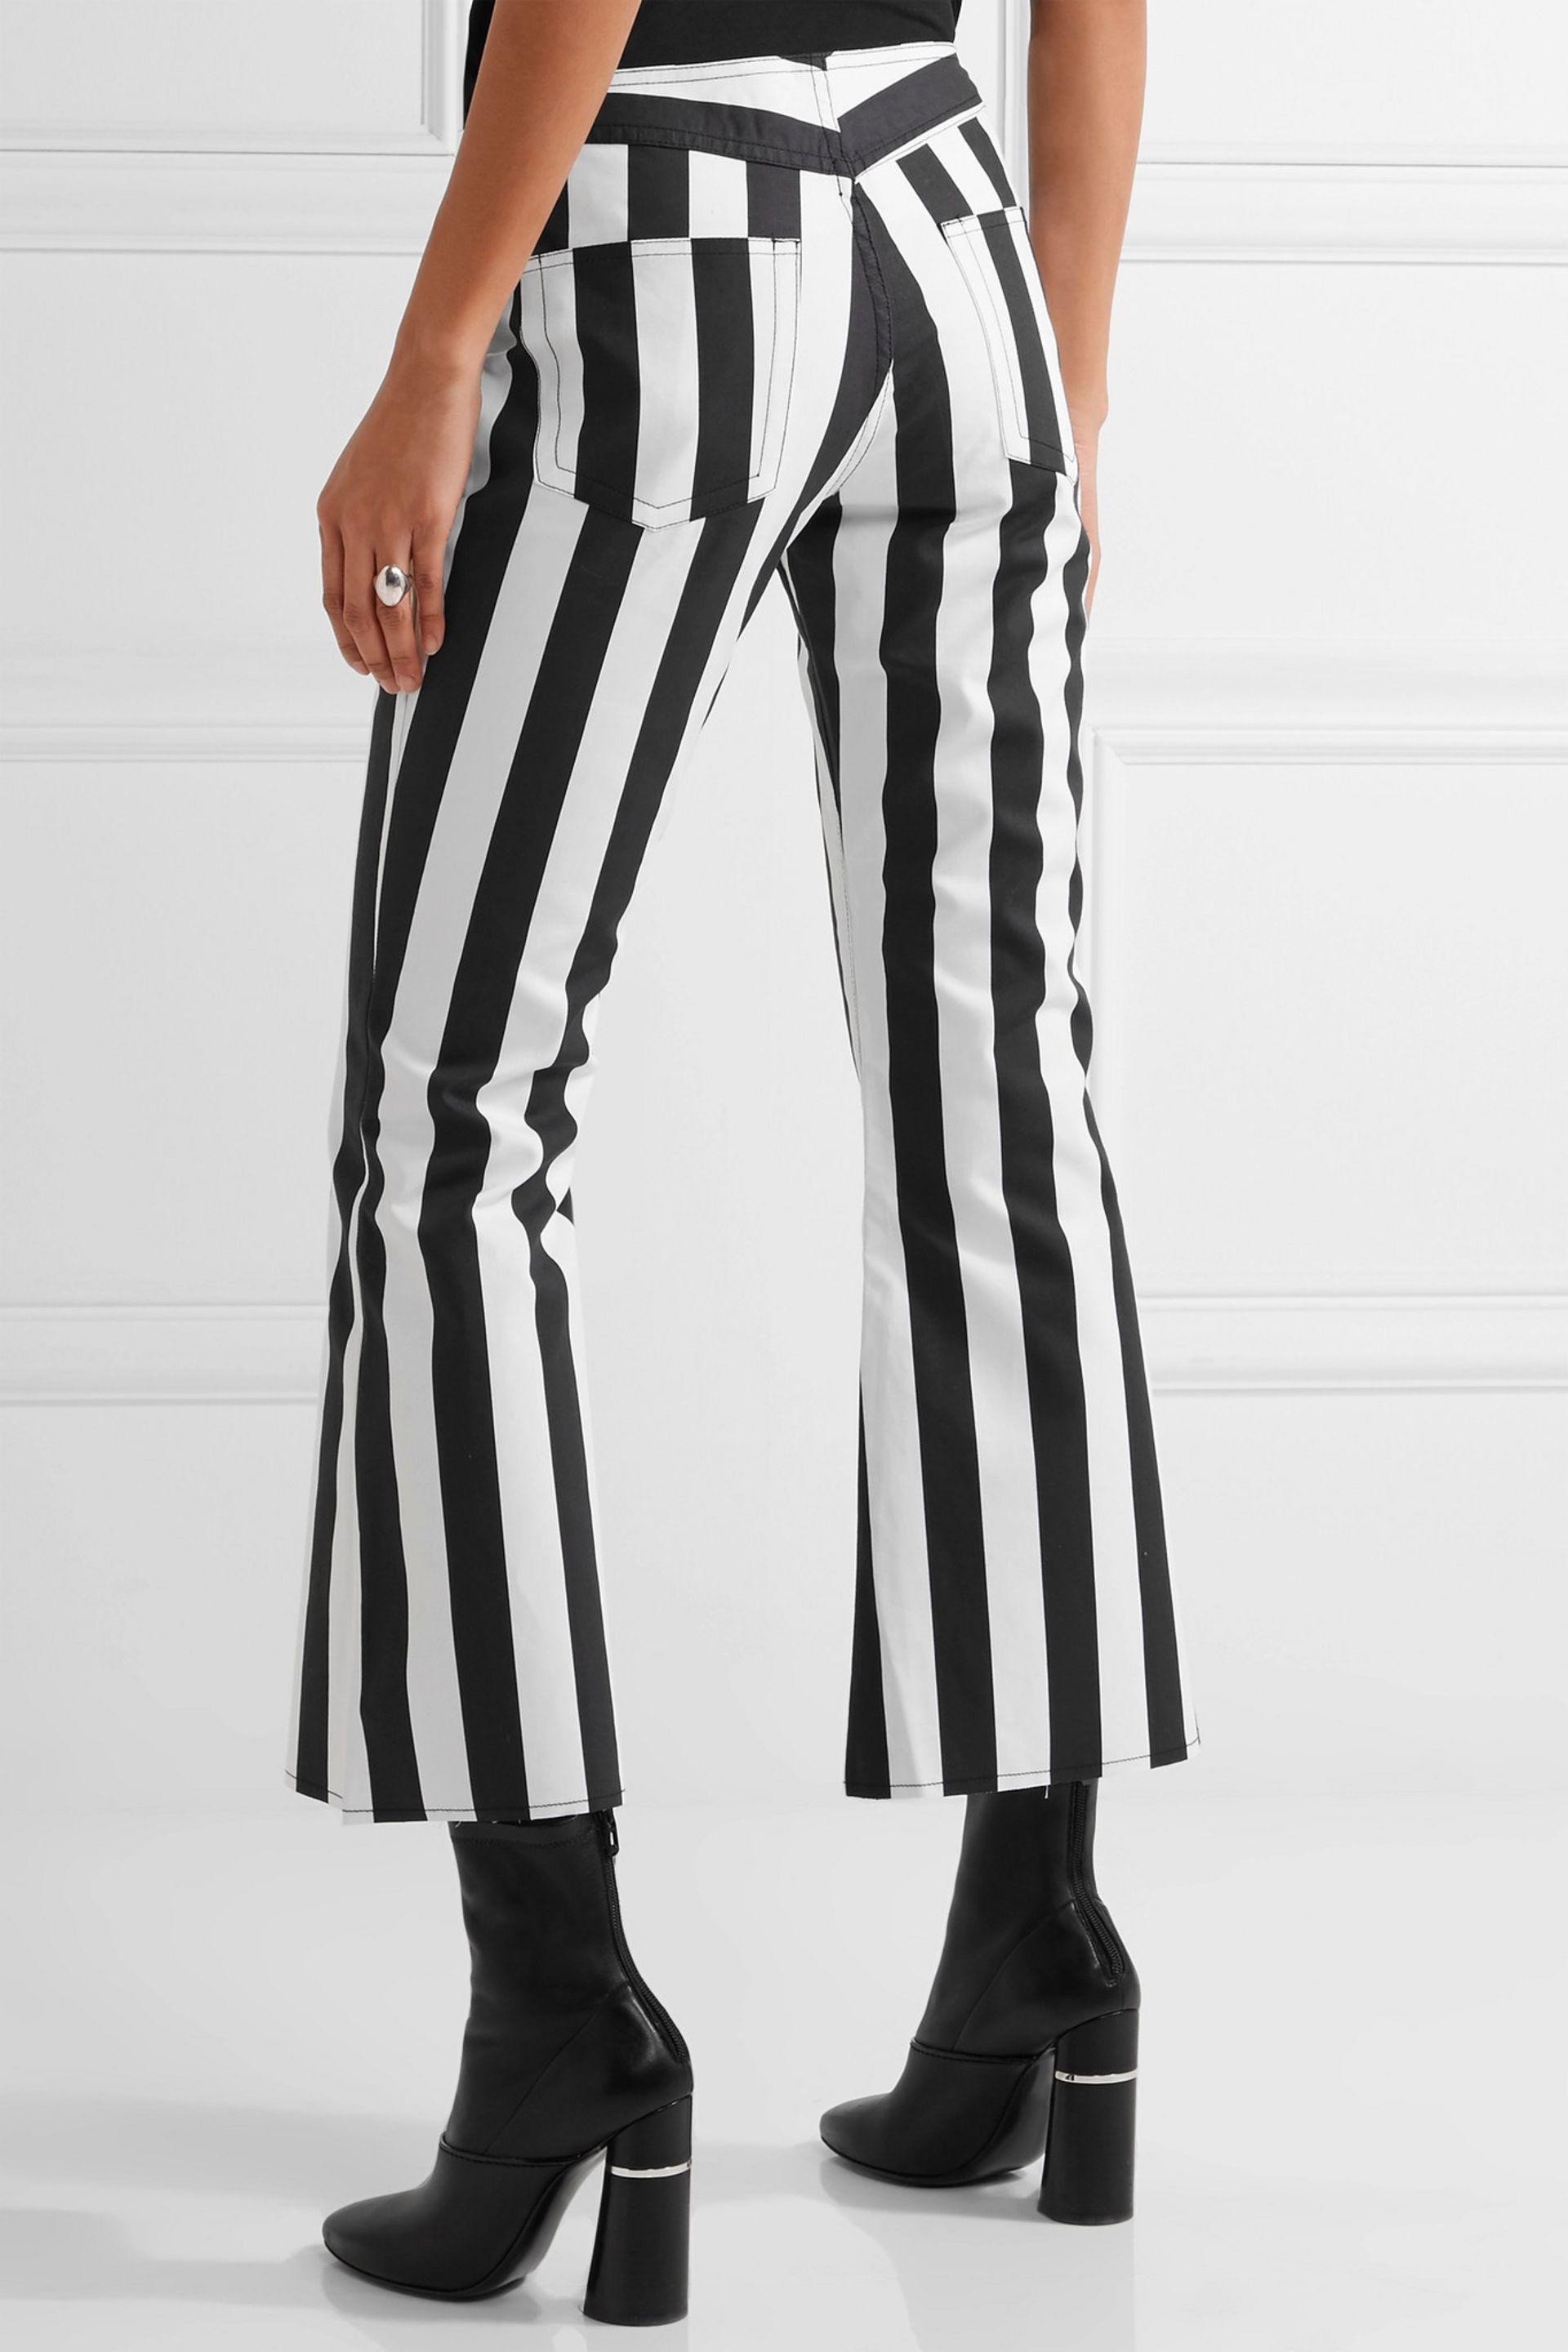 Lyst - Marques'Almeida Cropped Striped Cotton-poplin Flared Pants in Black